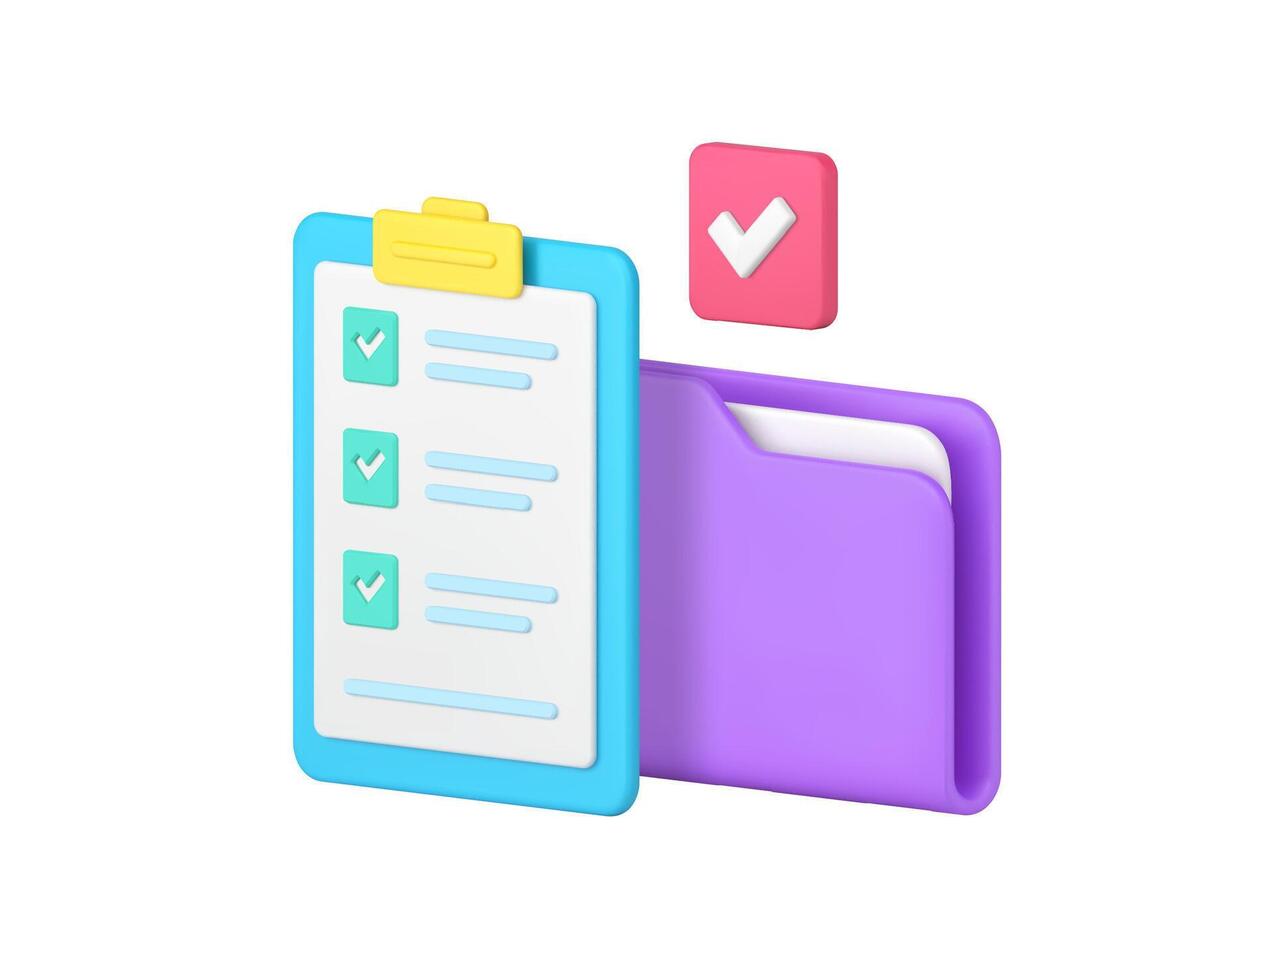 Document work business productivity efficiency planning checklist file folder 3d icon vector